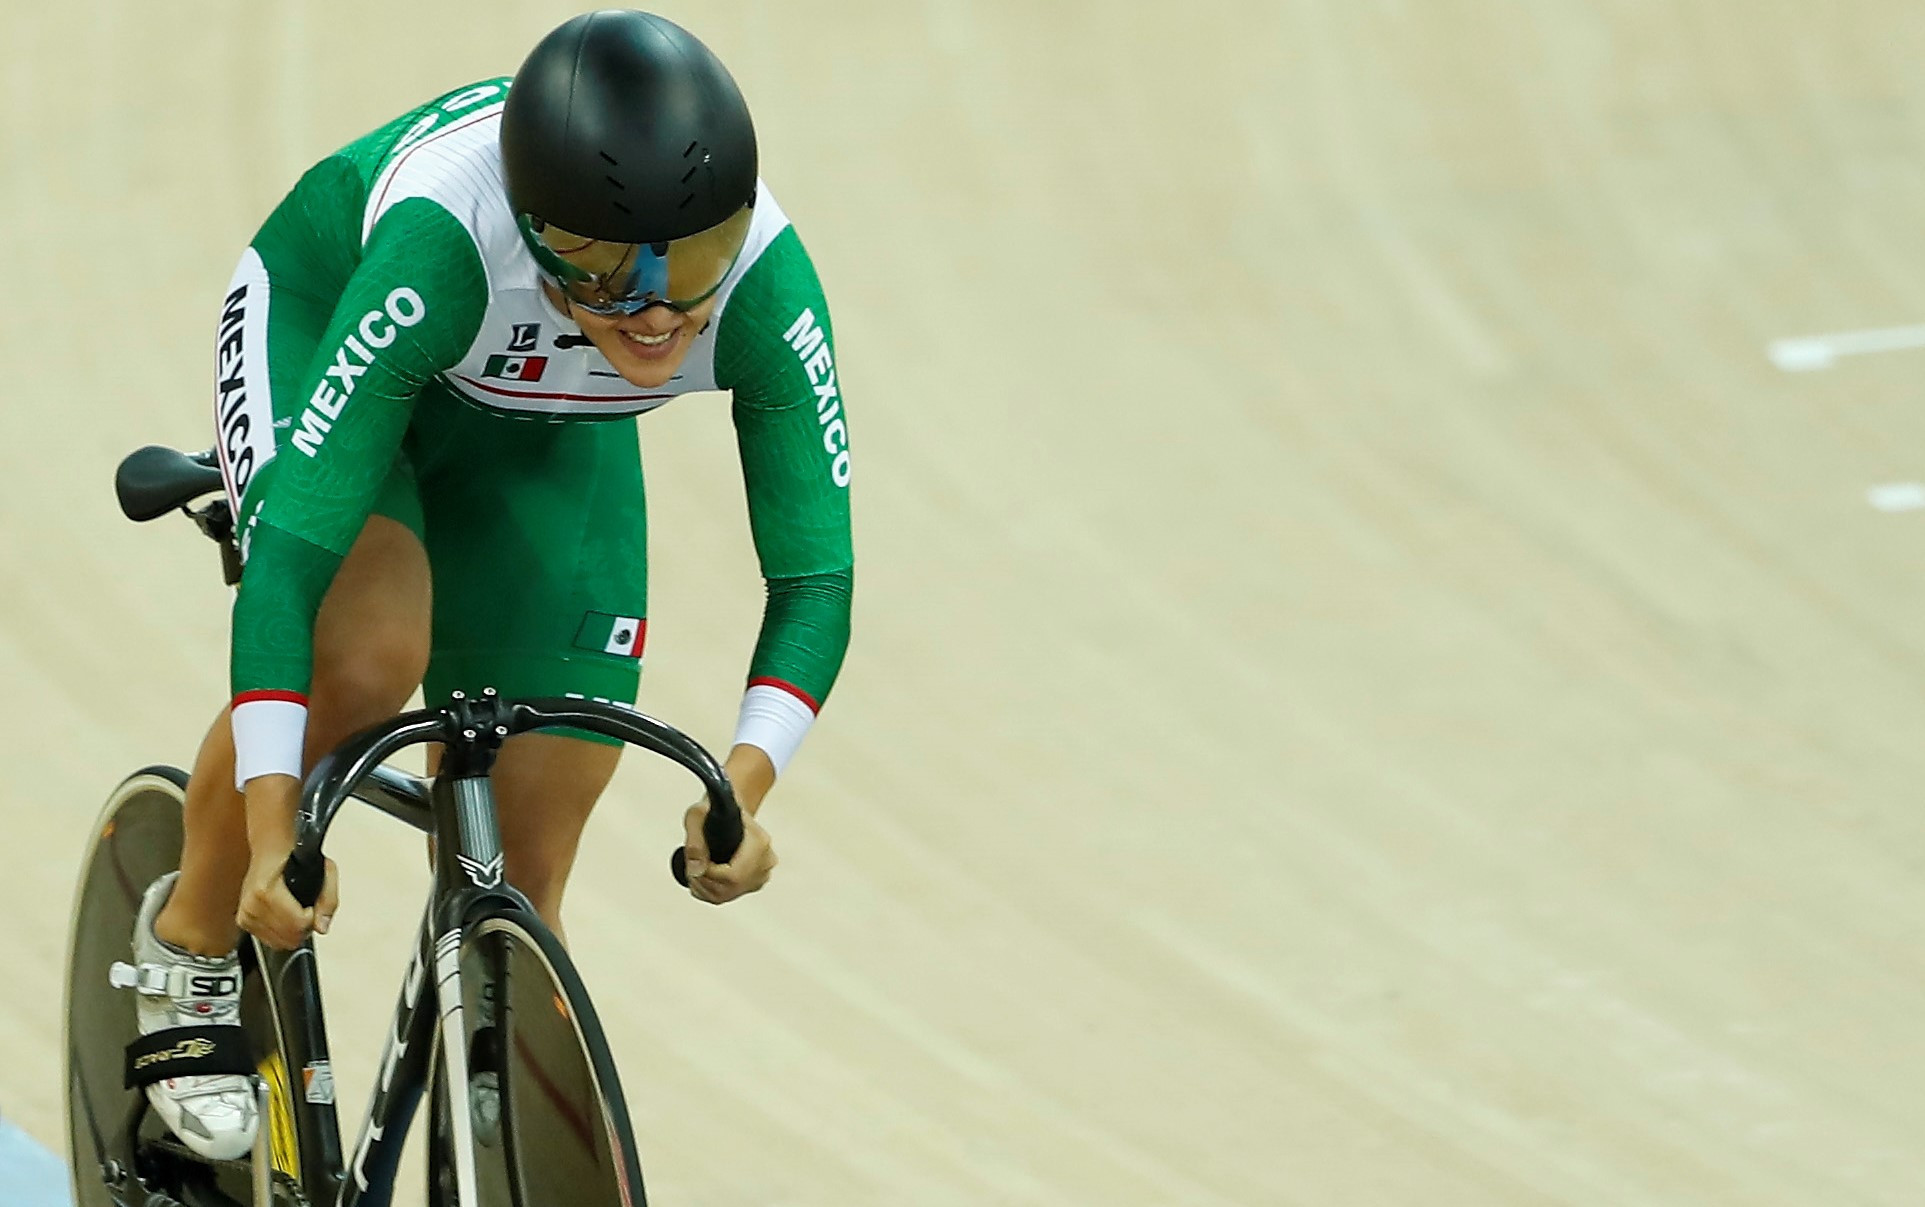 Yuli Verdugo triumphed in the women's keirin on her 24th birthday  ©Getty Images